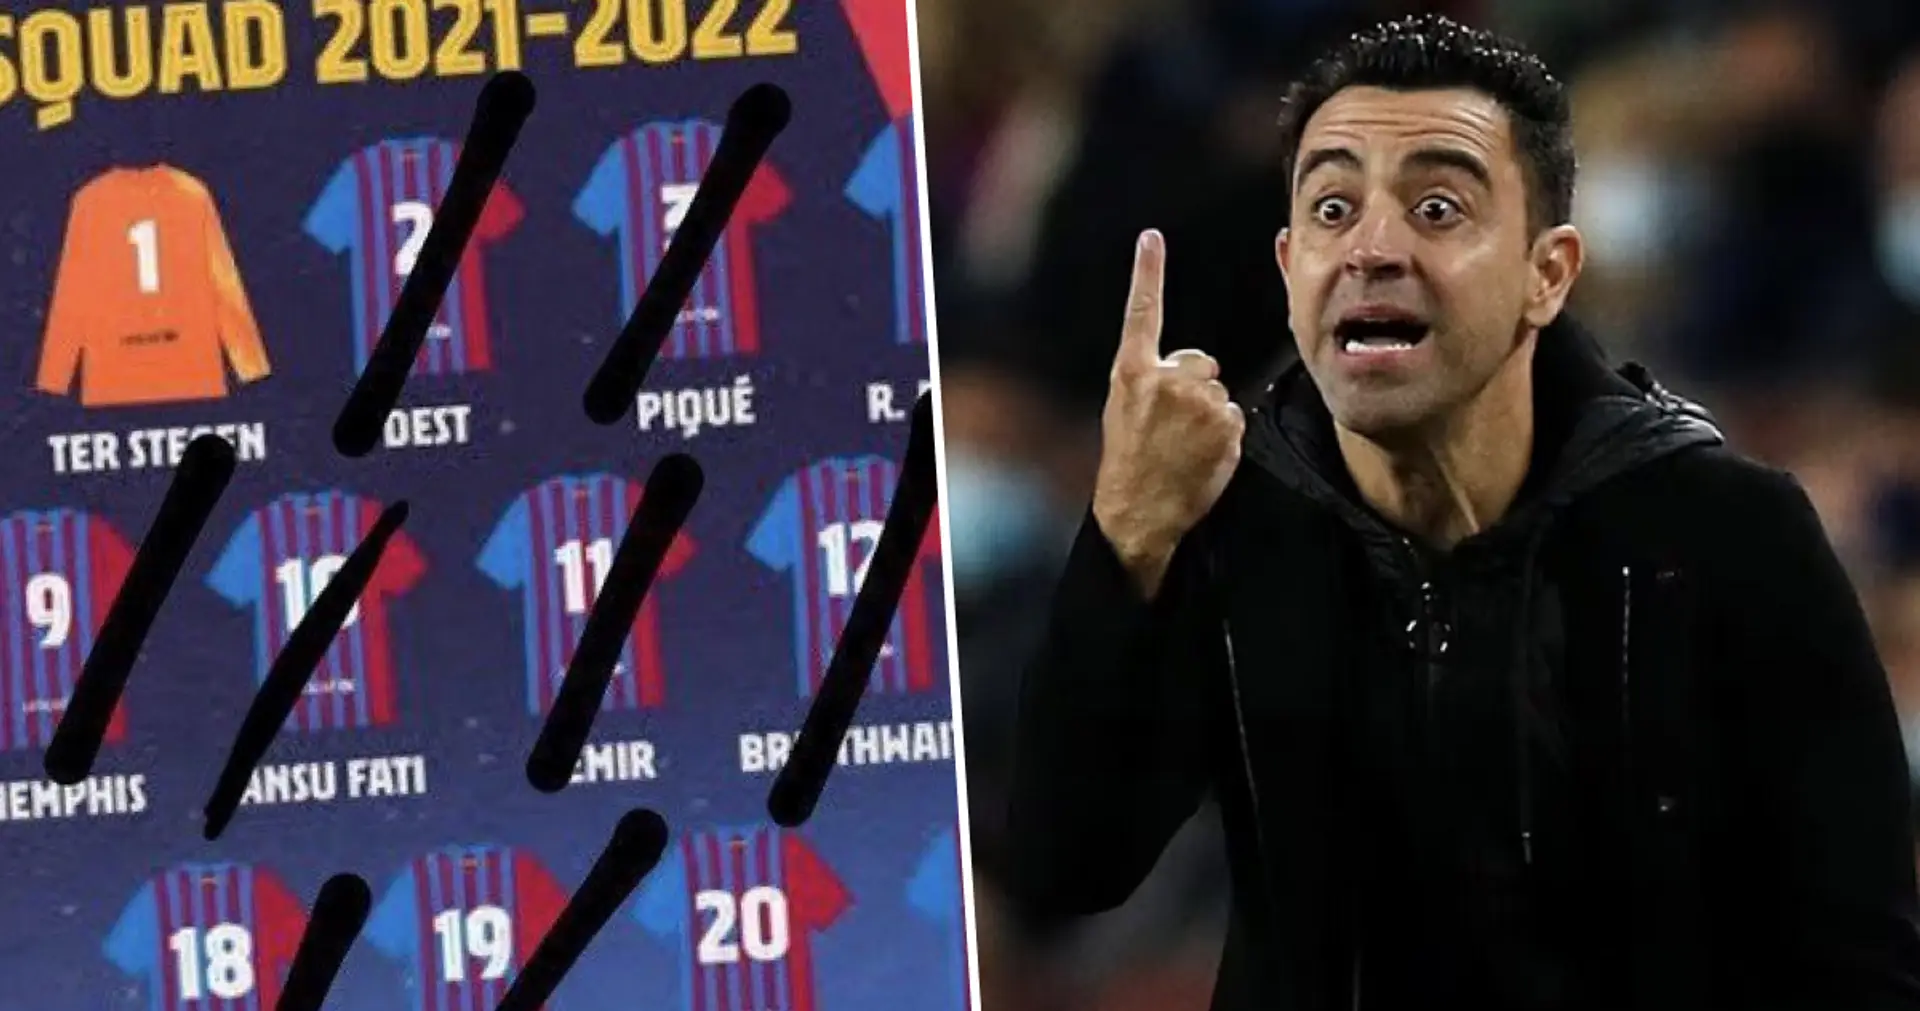 Just 6 players remain from Xavi's first Barca squad – it hasn't even been 2 years since